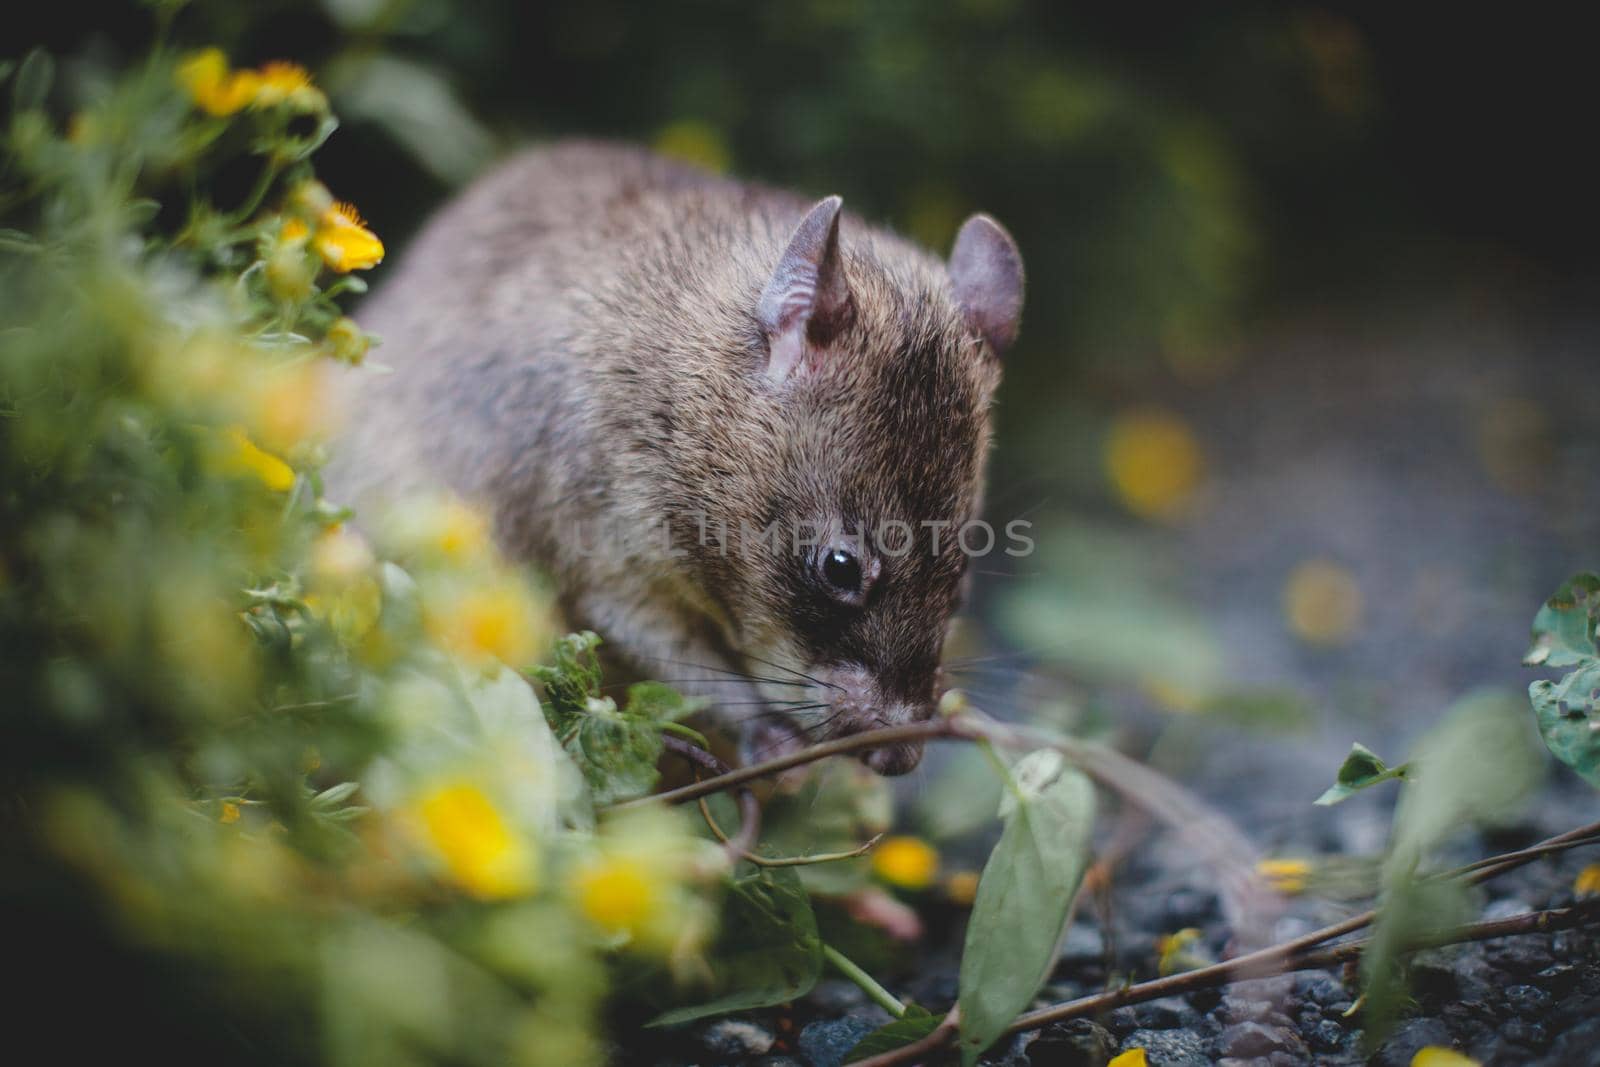 Giant african pouched rat in a garden with pansies by RosaJay